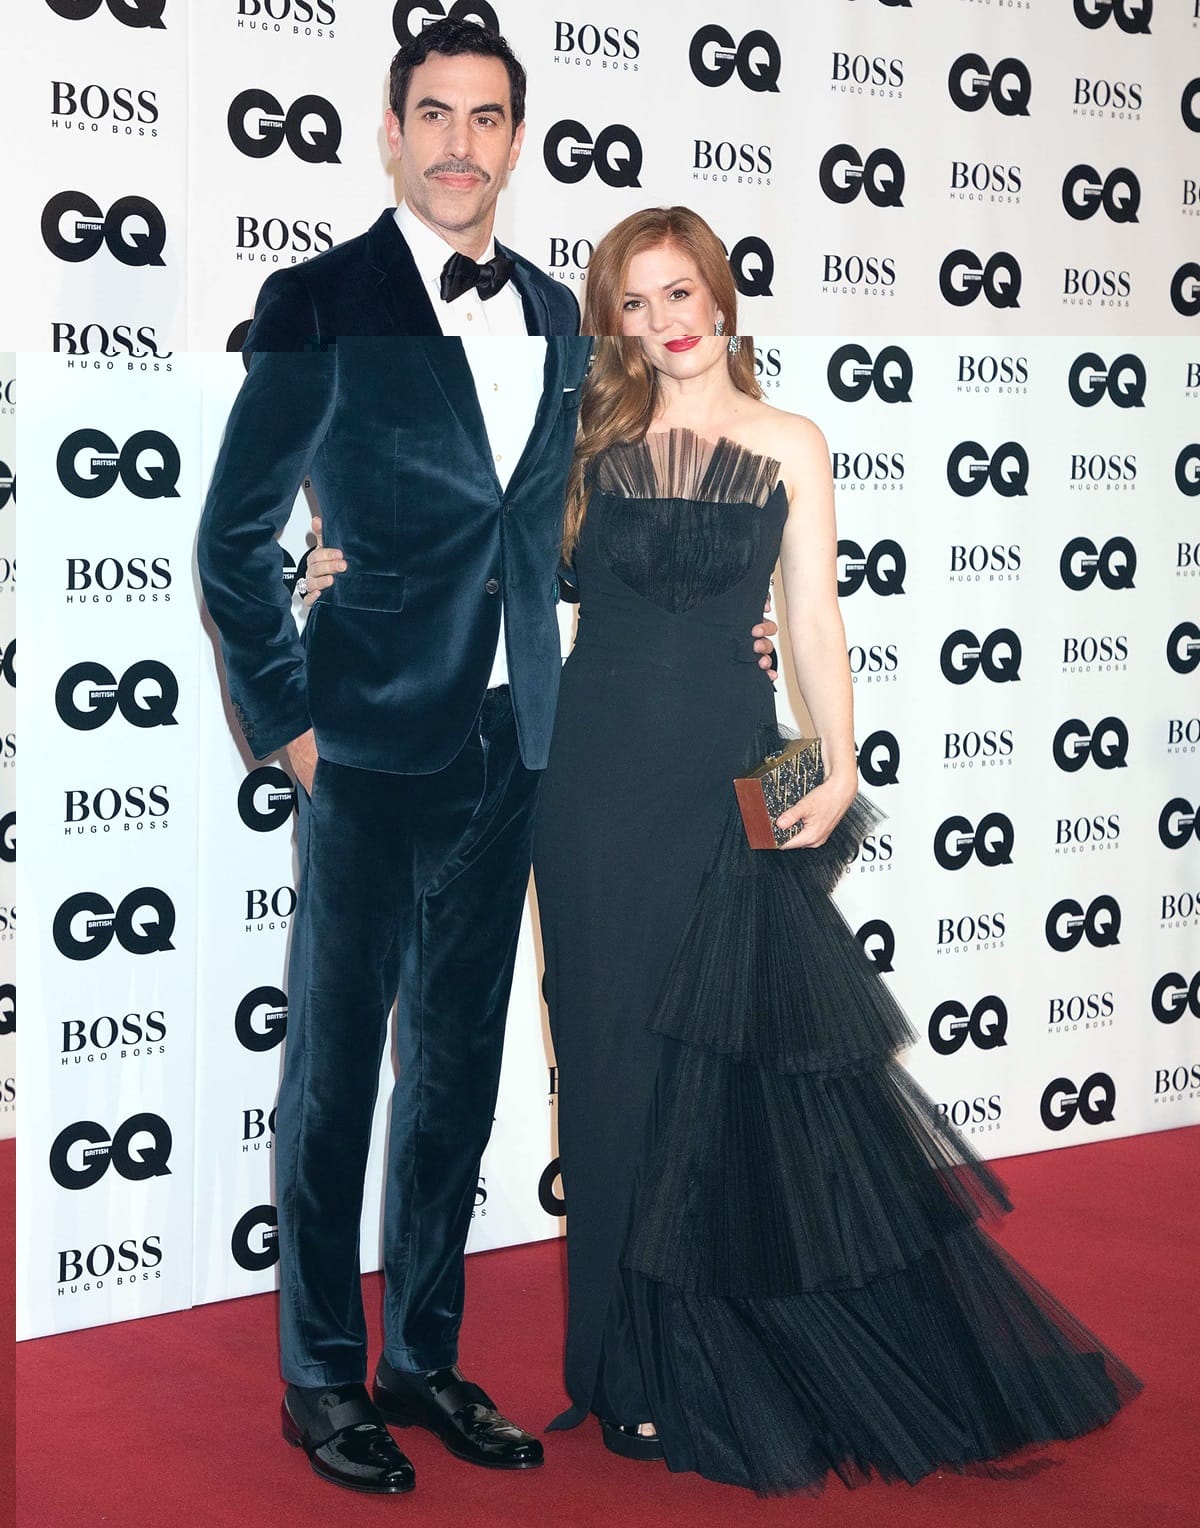 Sacha Baron Cohen, who stands at 6ft 3 (190.5 cm), and Isla Fisher, with a height of 5ft 2 (157.5 cm), attended the GQ Men of the Year Awards